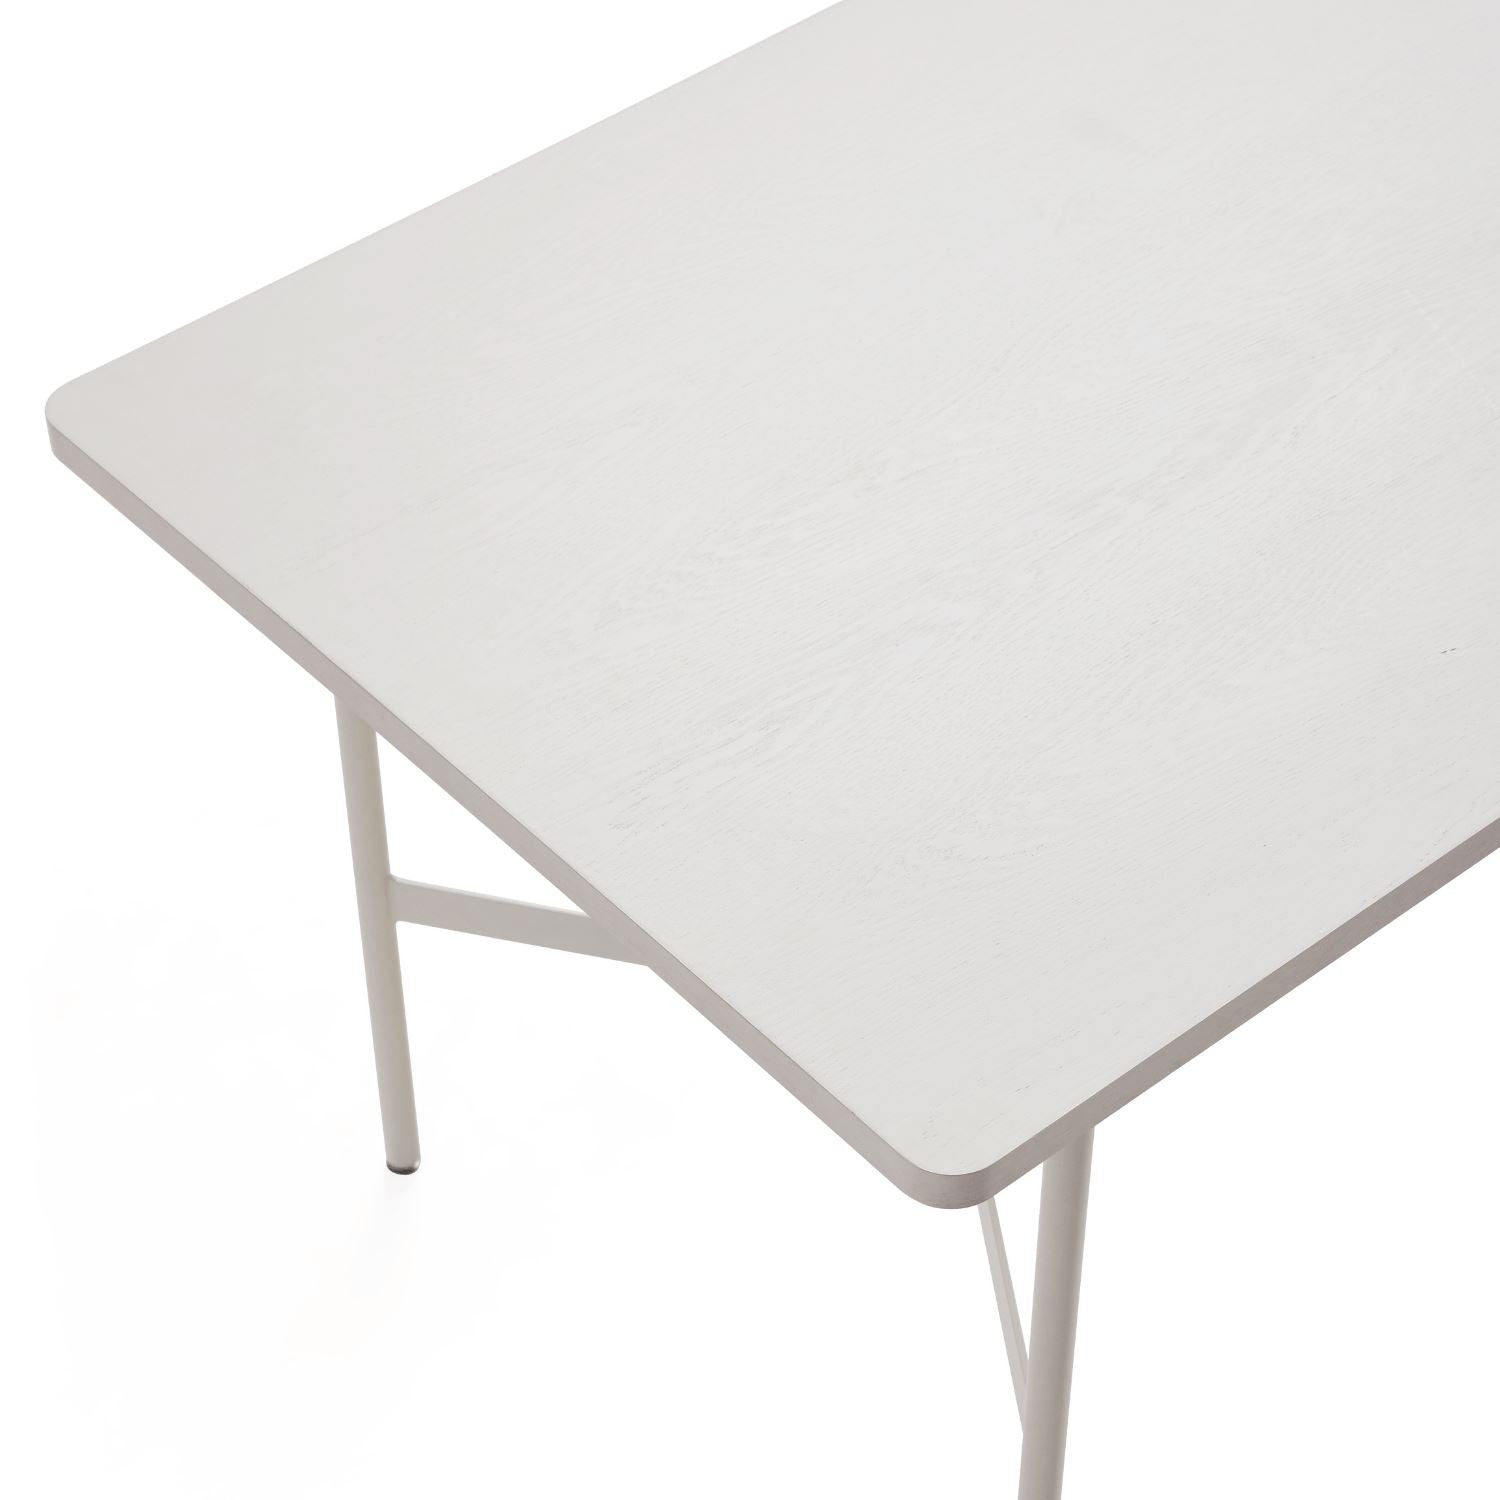 Valque Dining Table - Valyou 